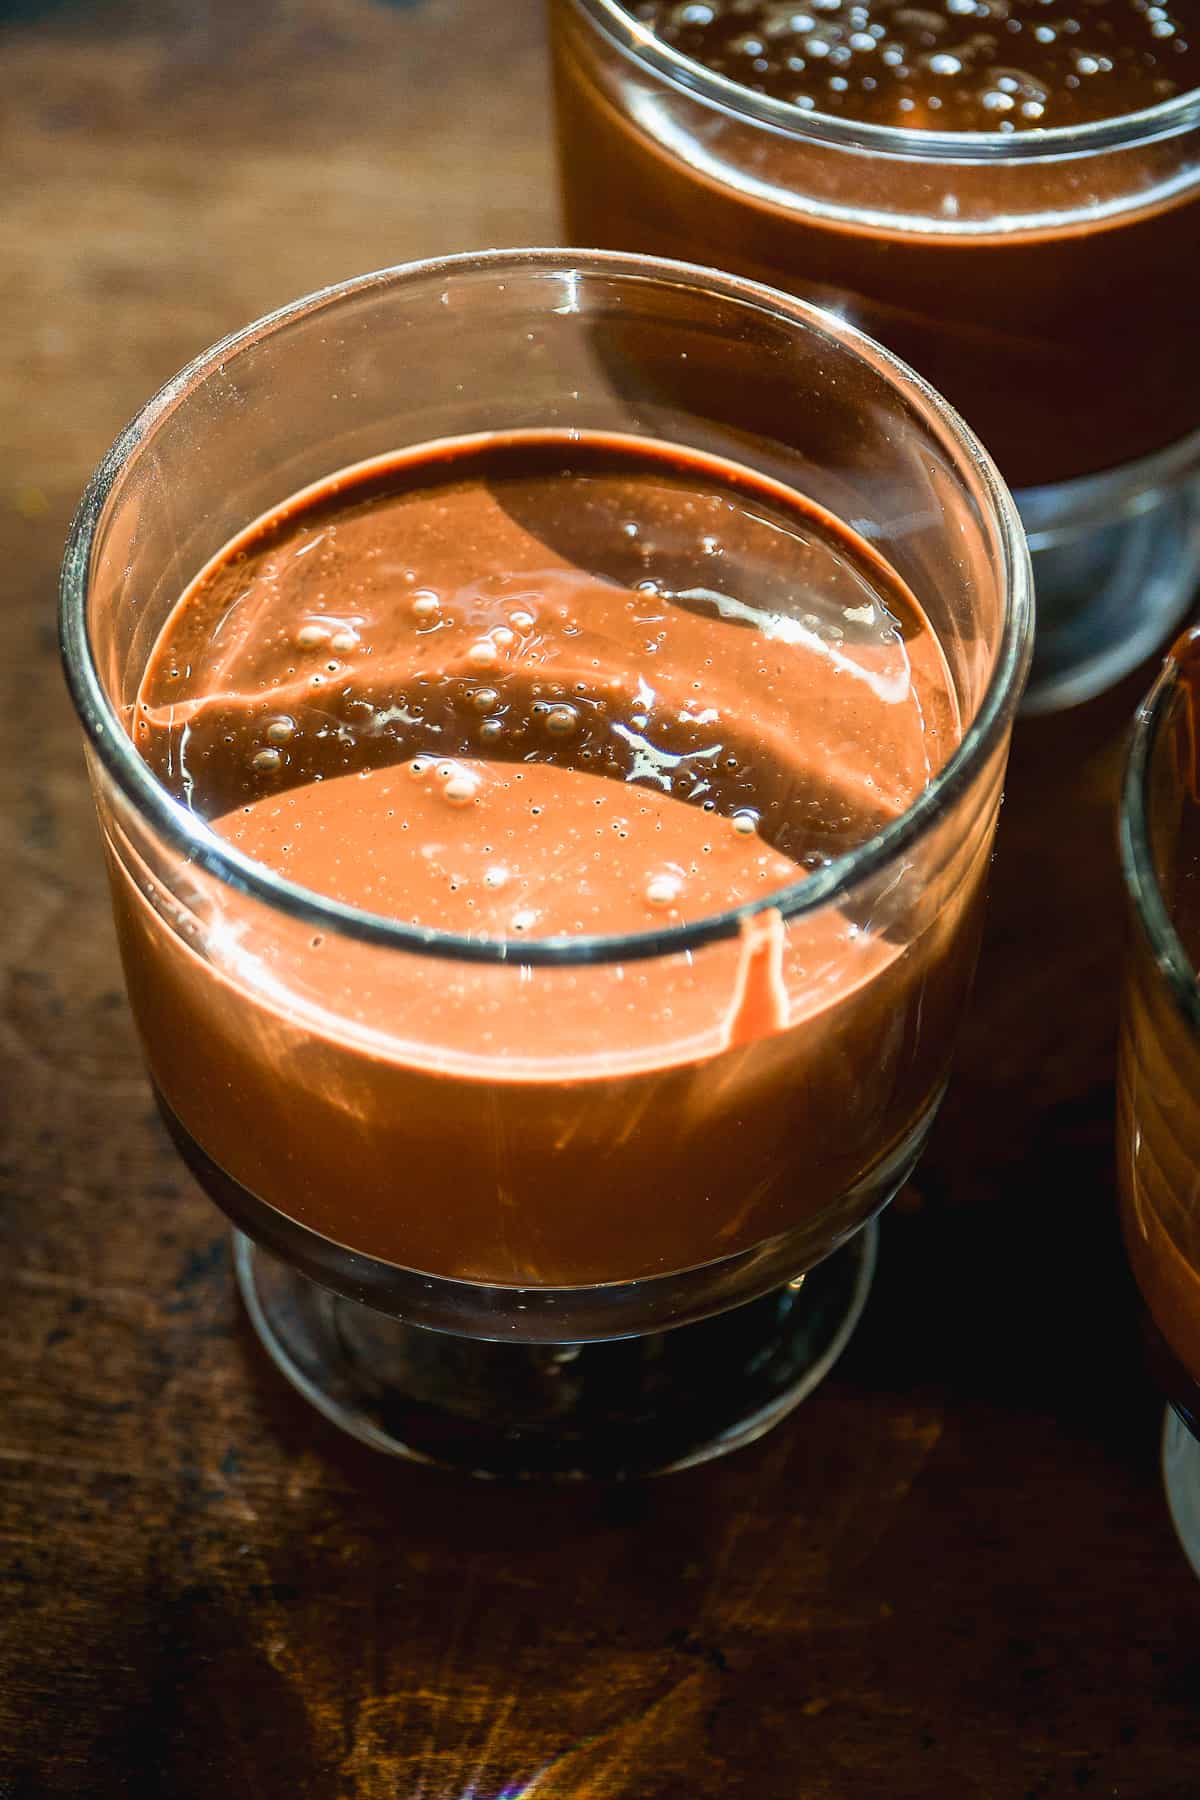 Chocolate mousse poured in a glass jar about to be chilled.